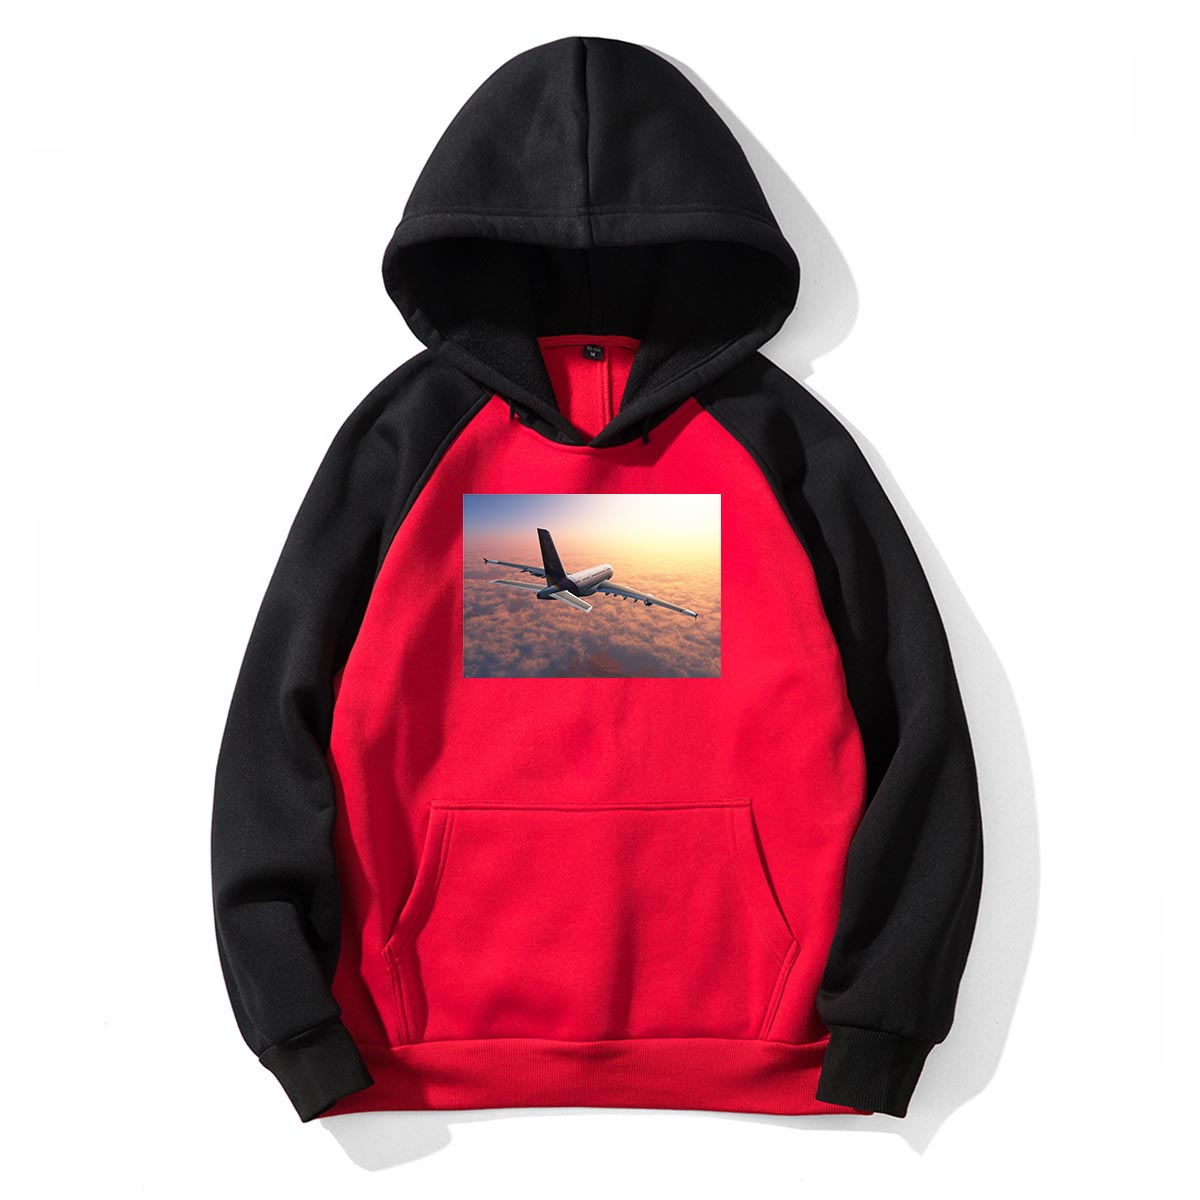 Super Cruising Airbus A380 over Clouds Designed Colourful Hoodies